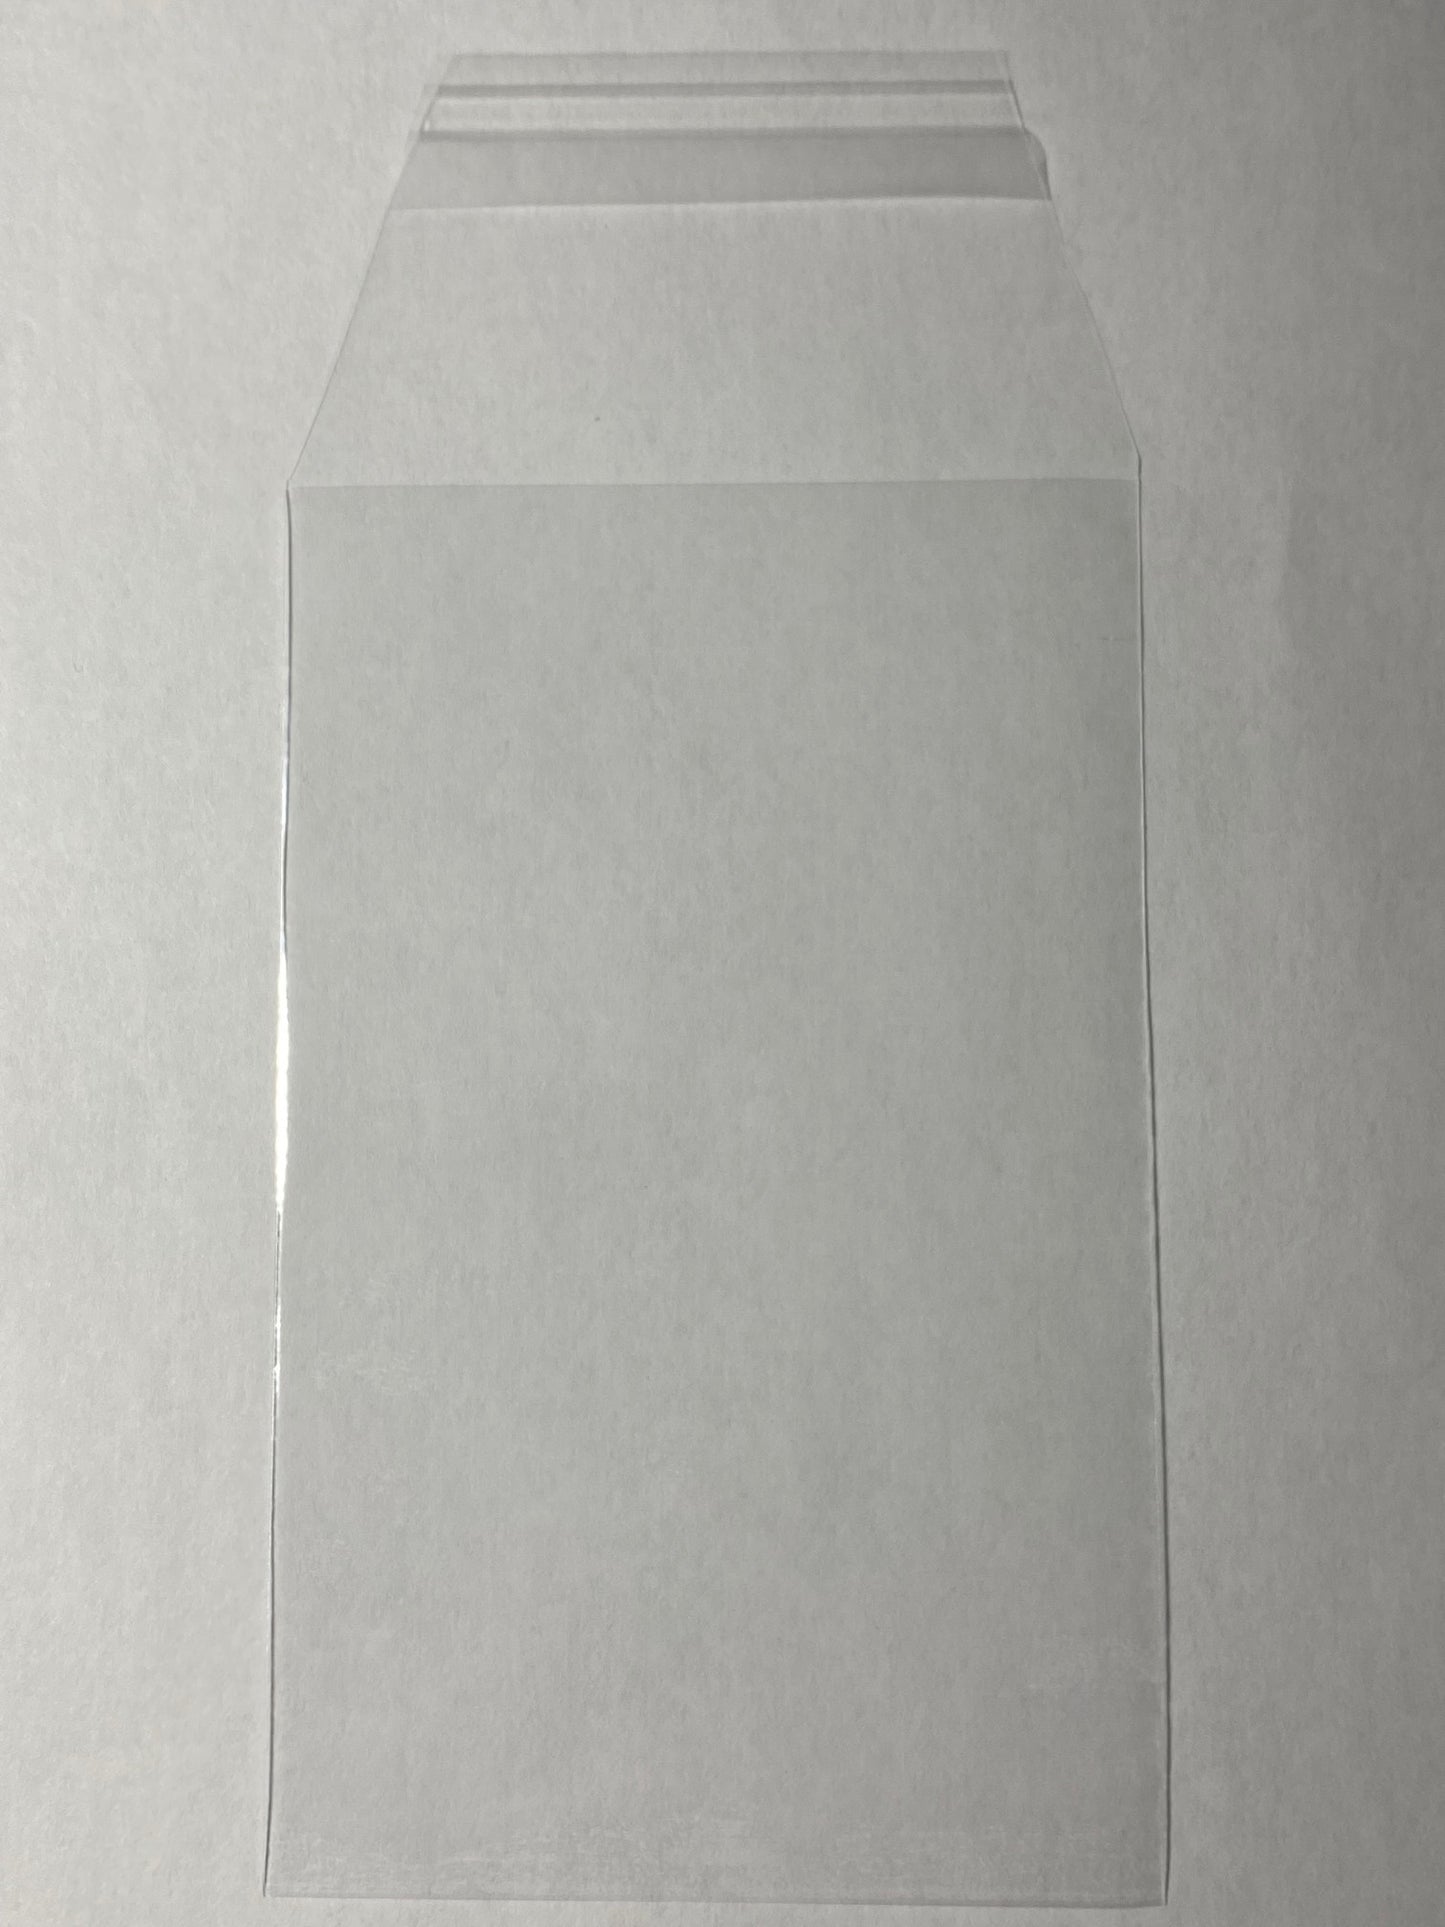 100 Graded Card Sleeves Perfect Snug Fit for PSA Slabs & More Resealable Lip